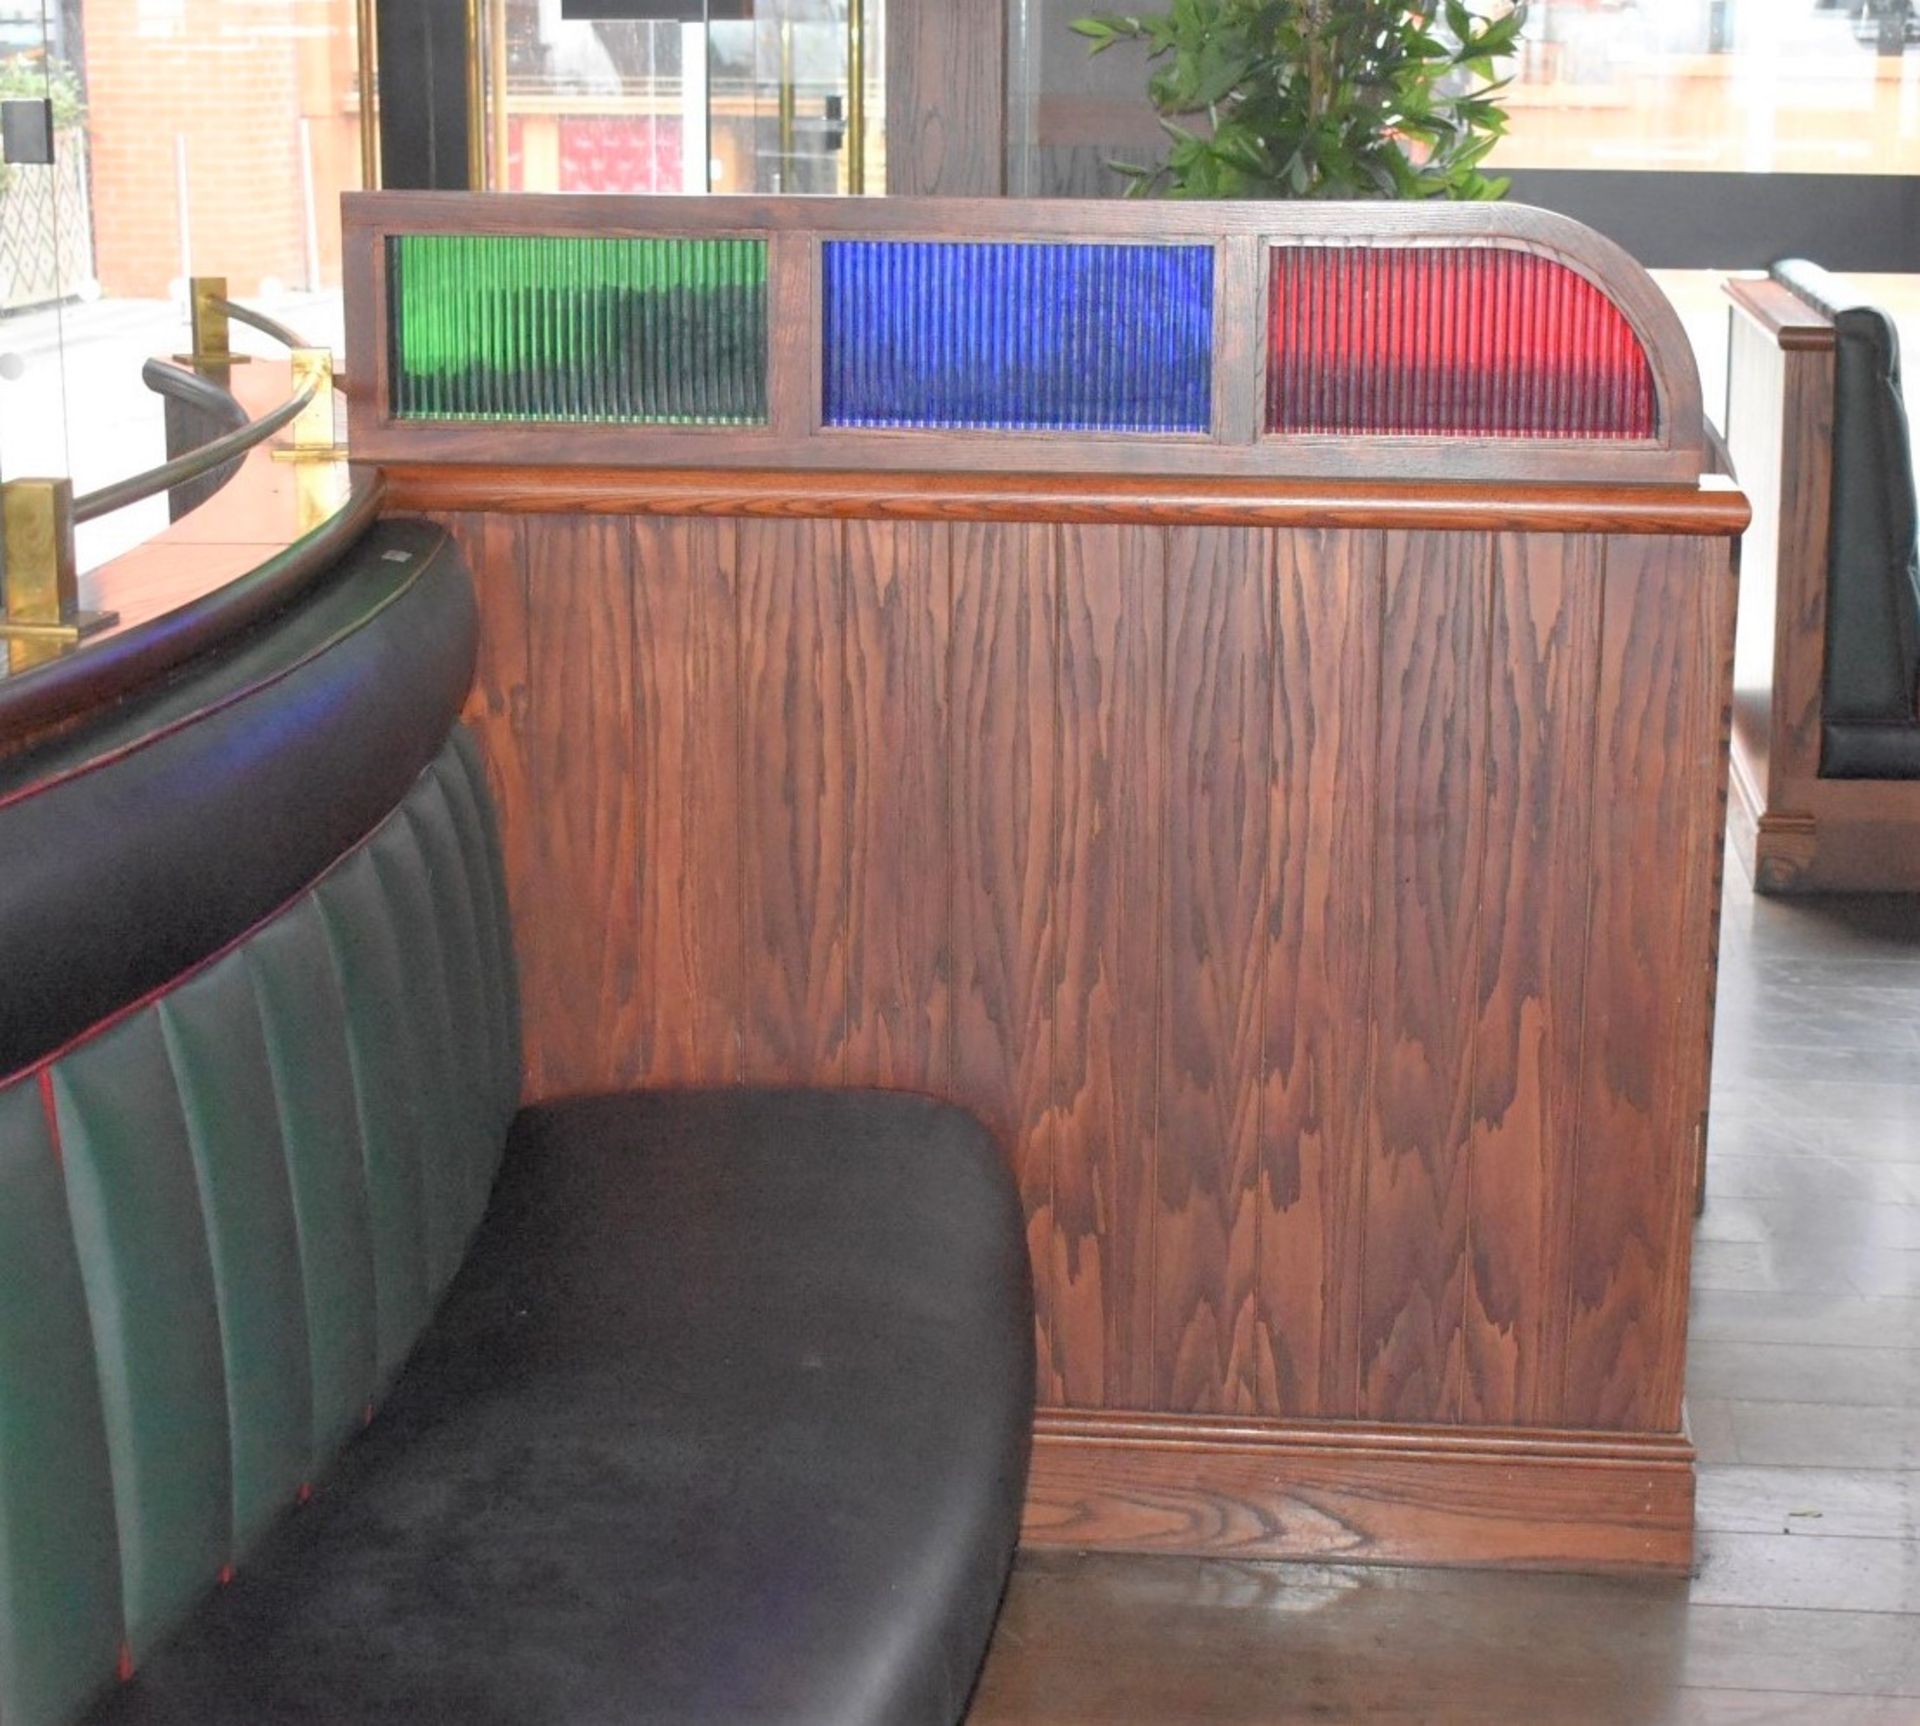 1 x Contemporary Restaurant Reception Counter With Rear Back Panel - Image 8 of 15